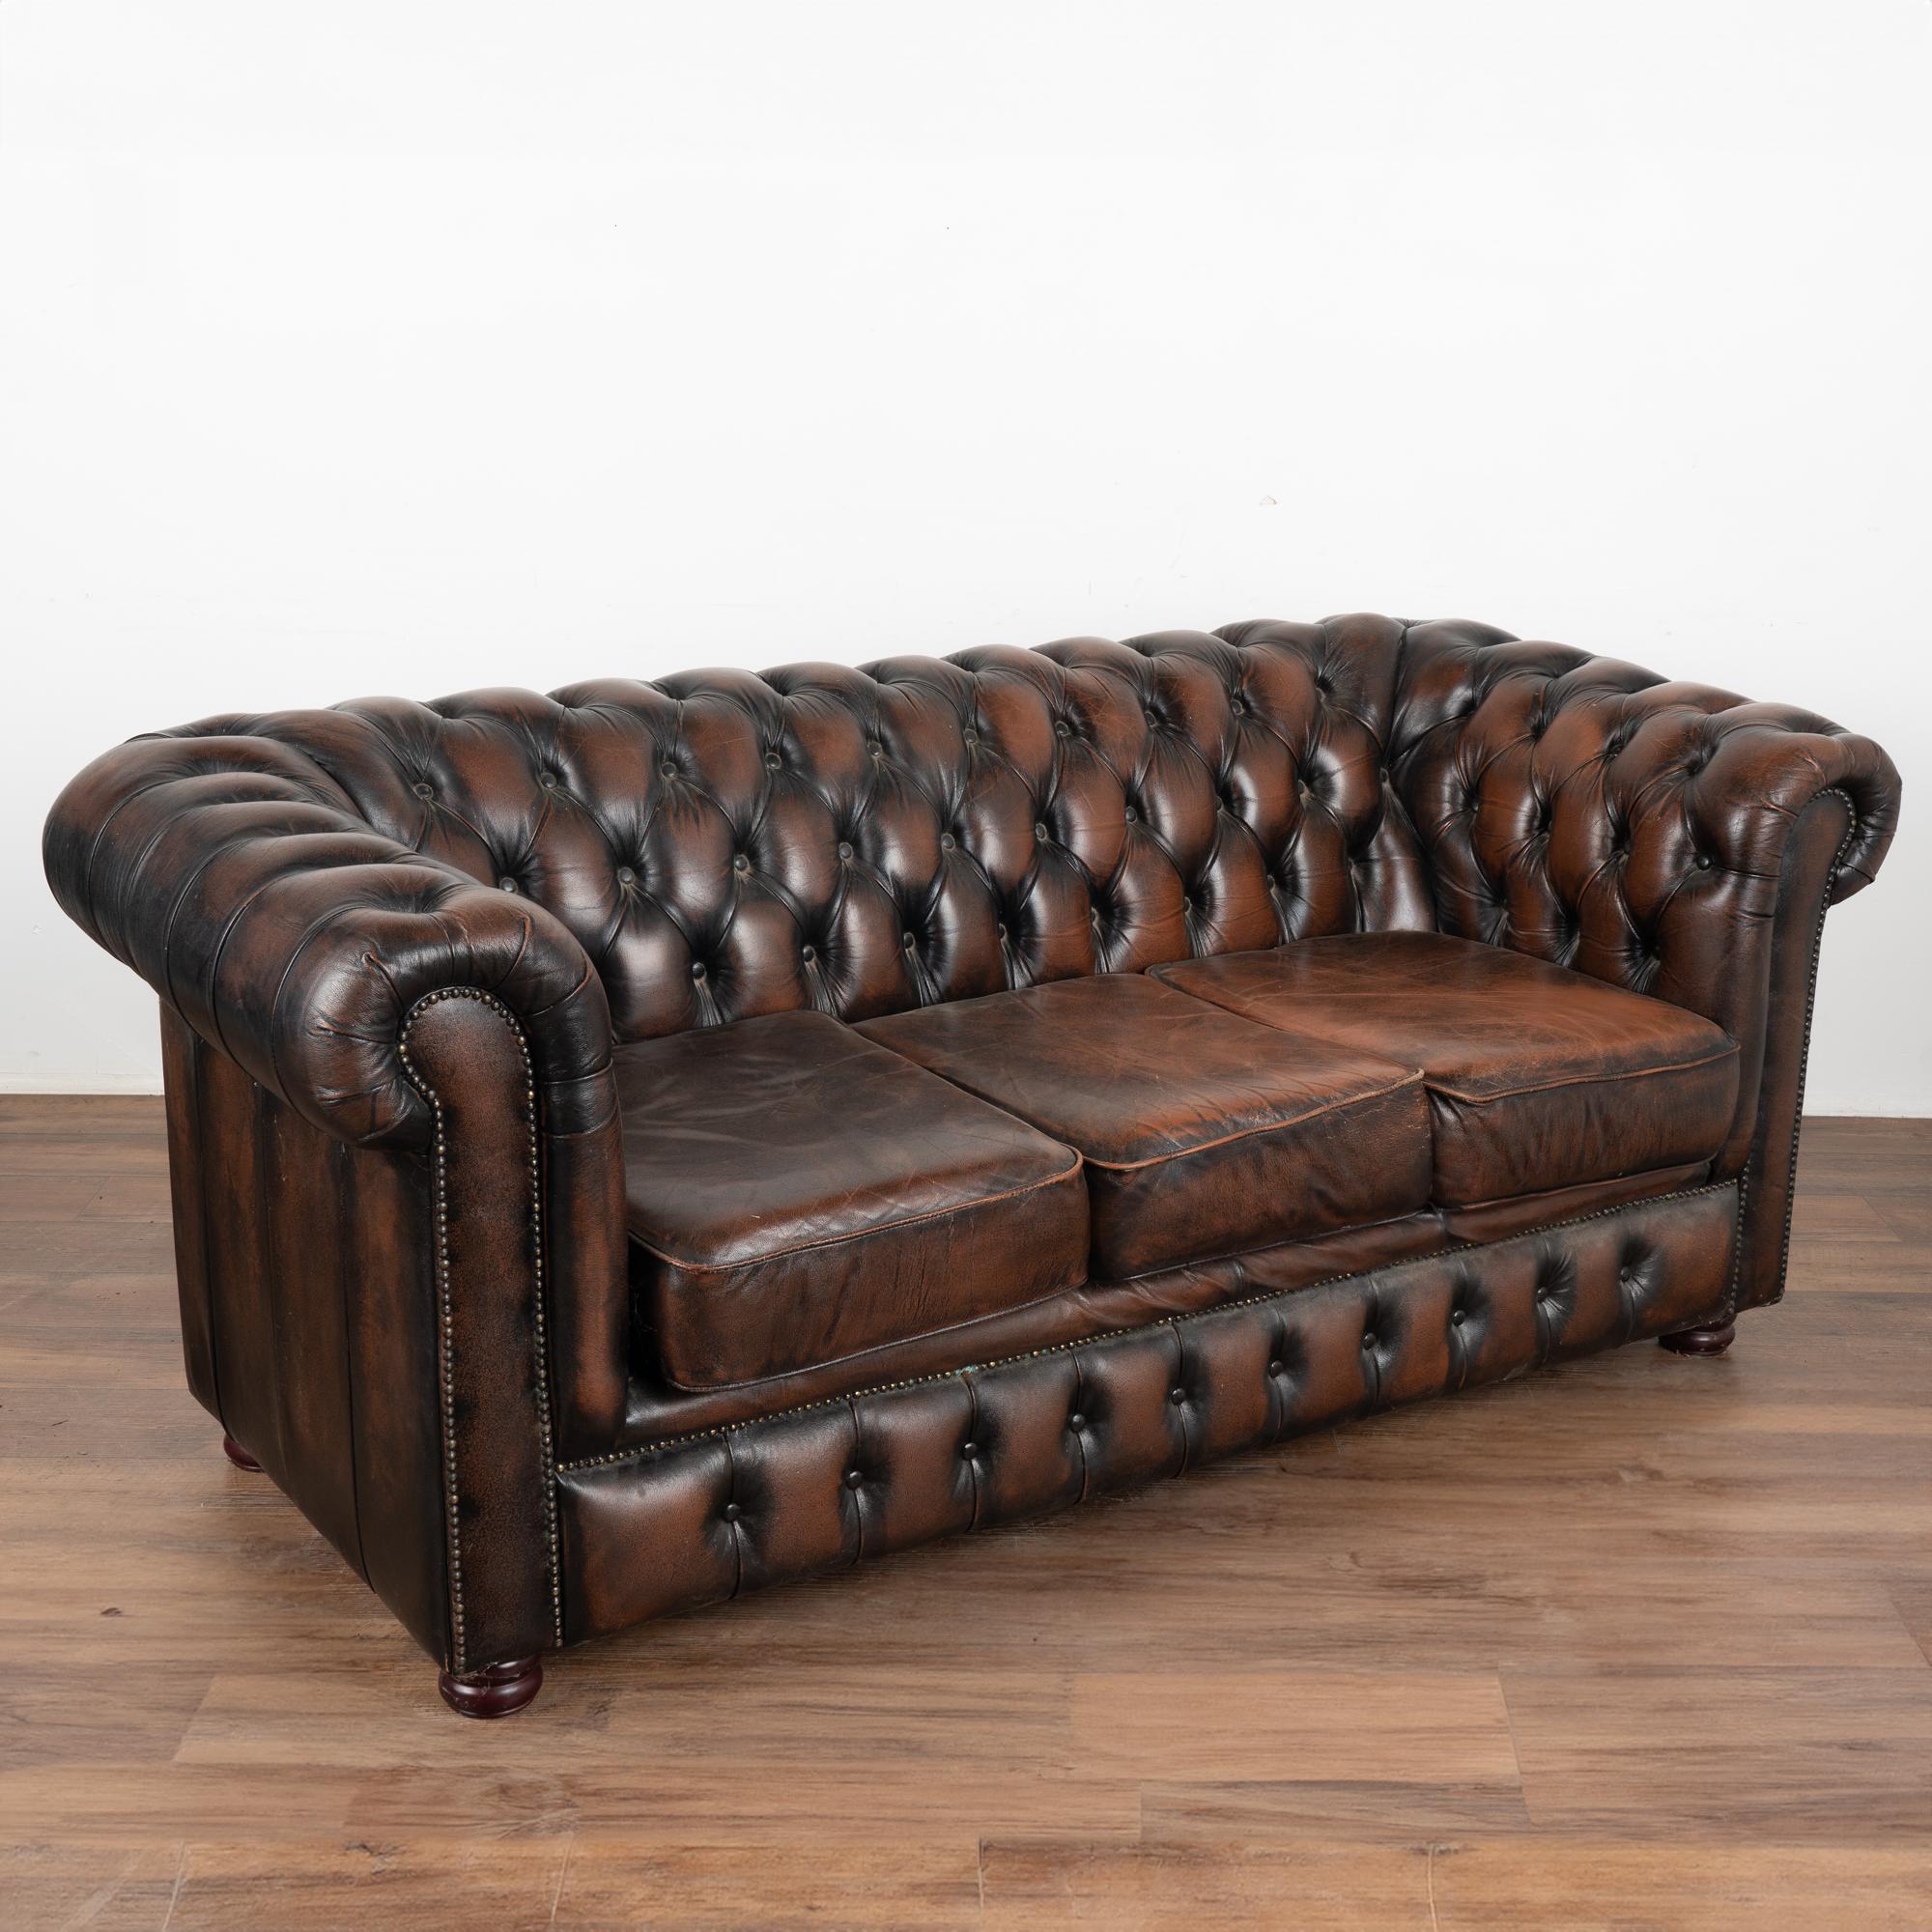 Danish Vintage Brown Leather Chesterfield 3 Seat and 2 Seat Sofa Set, circa 1970-80